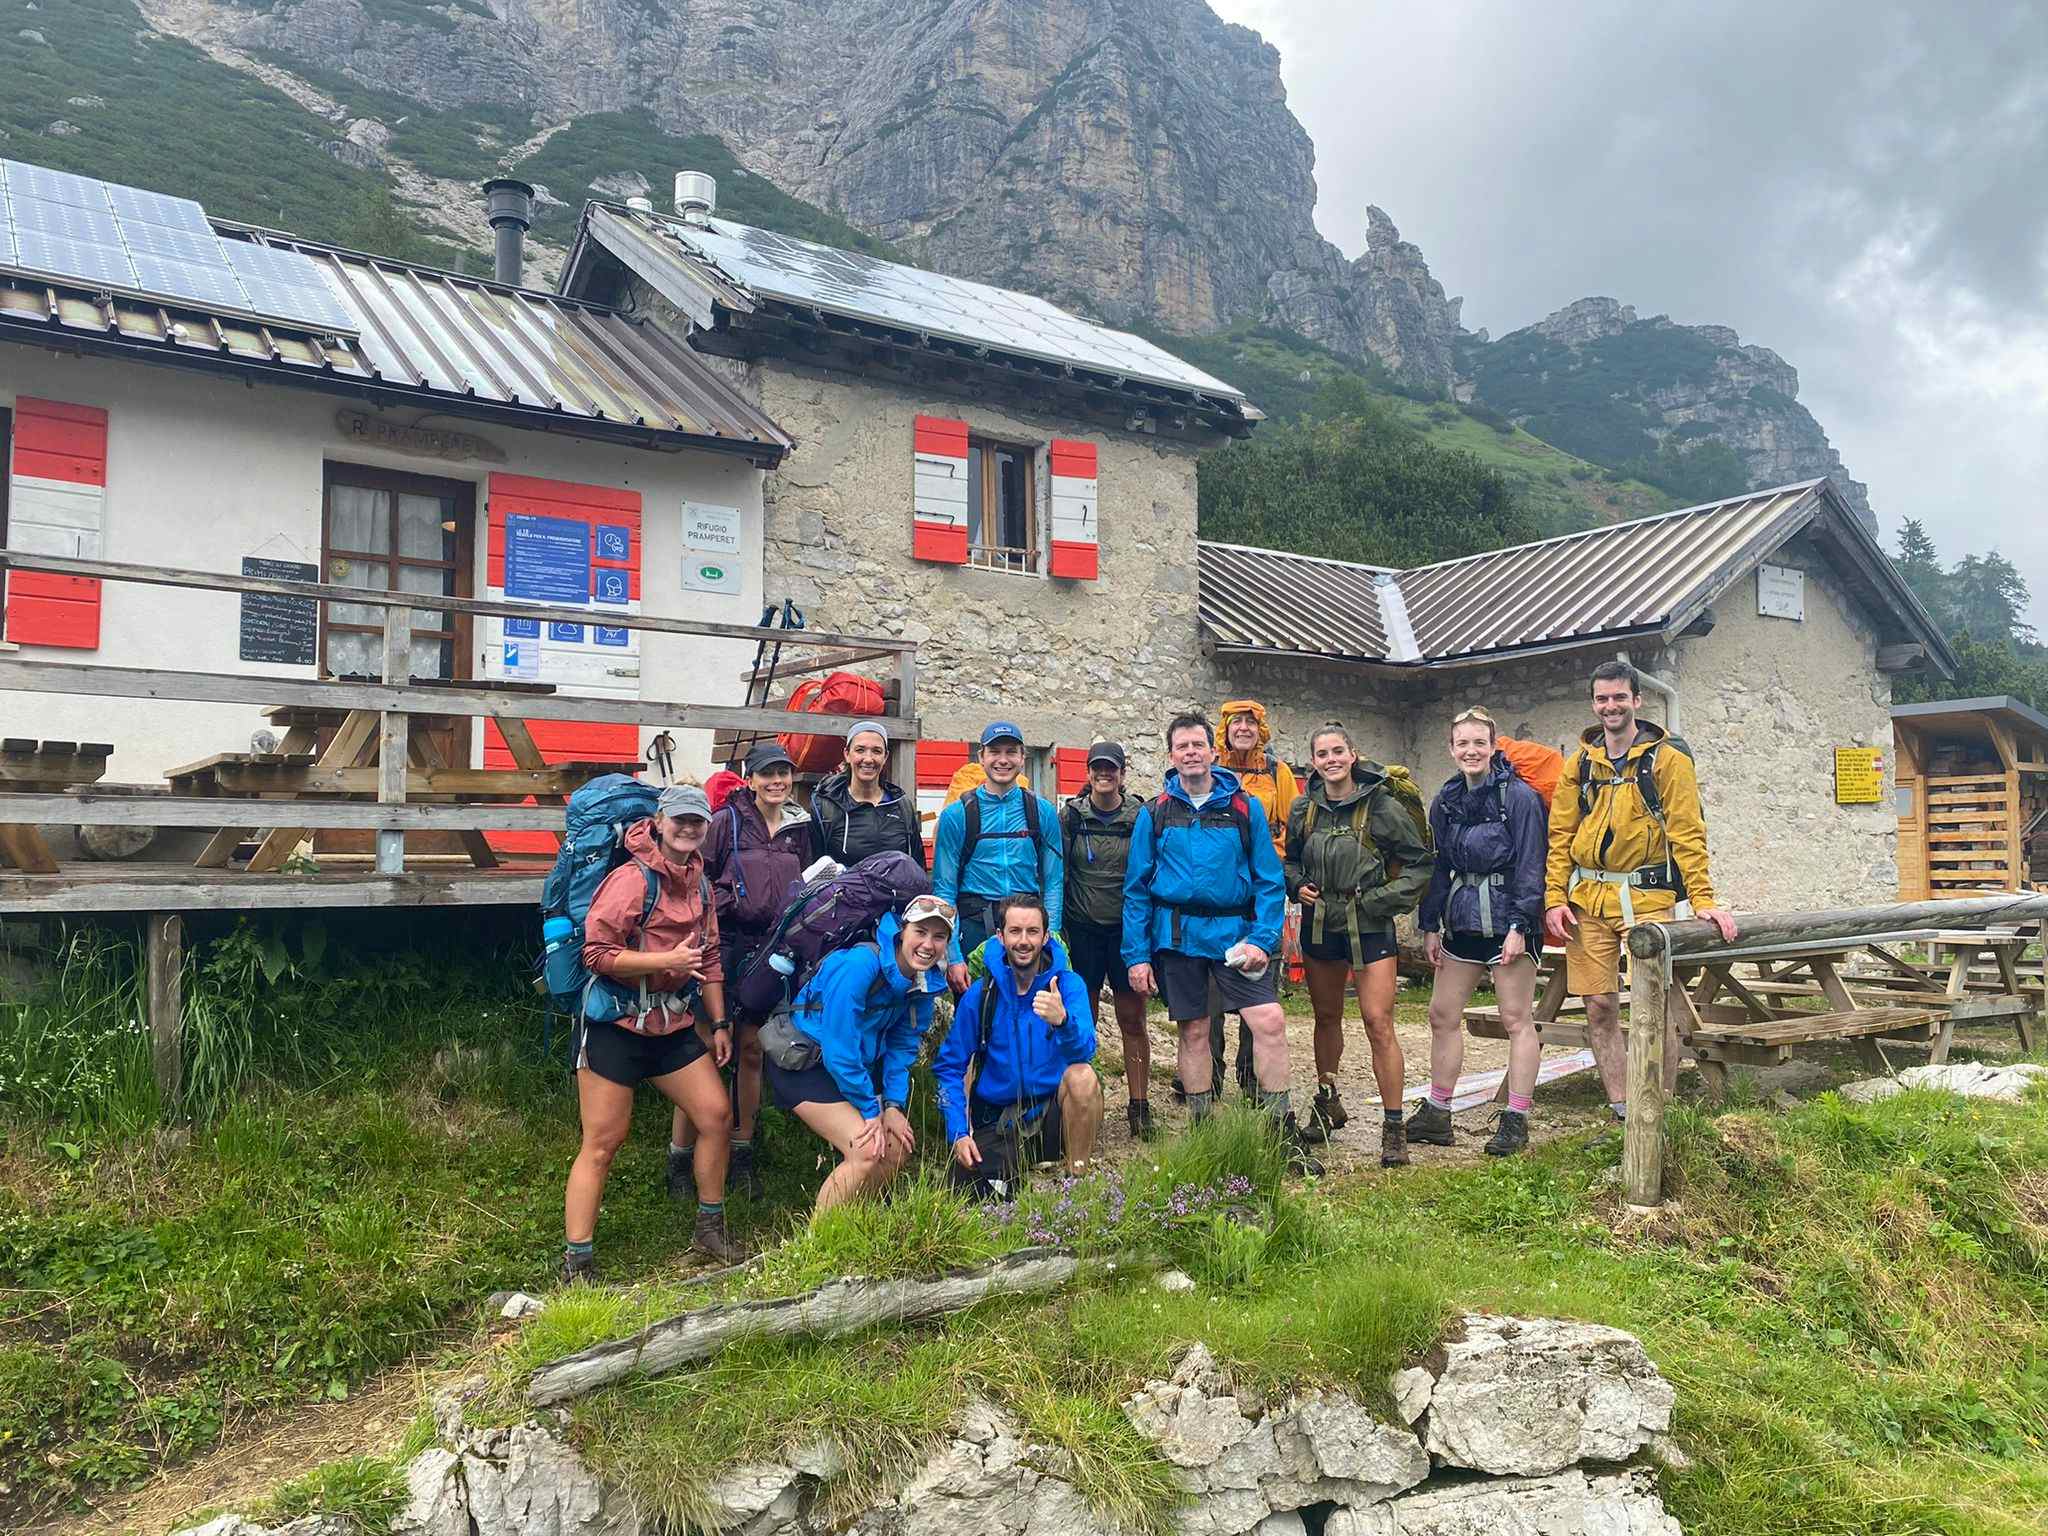 Group standing in front of a hut, Dolomites, Italy. Photo: Customer/Annie Chamberlain